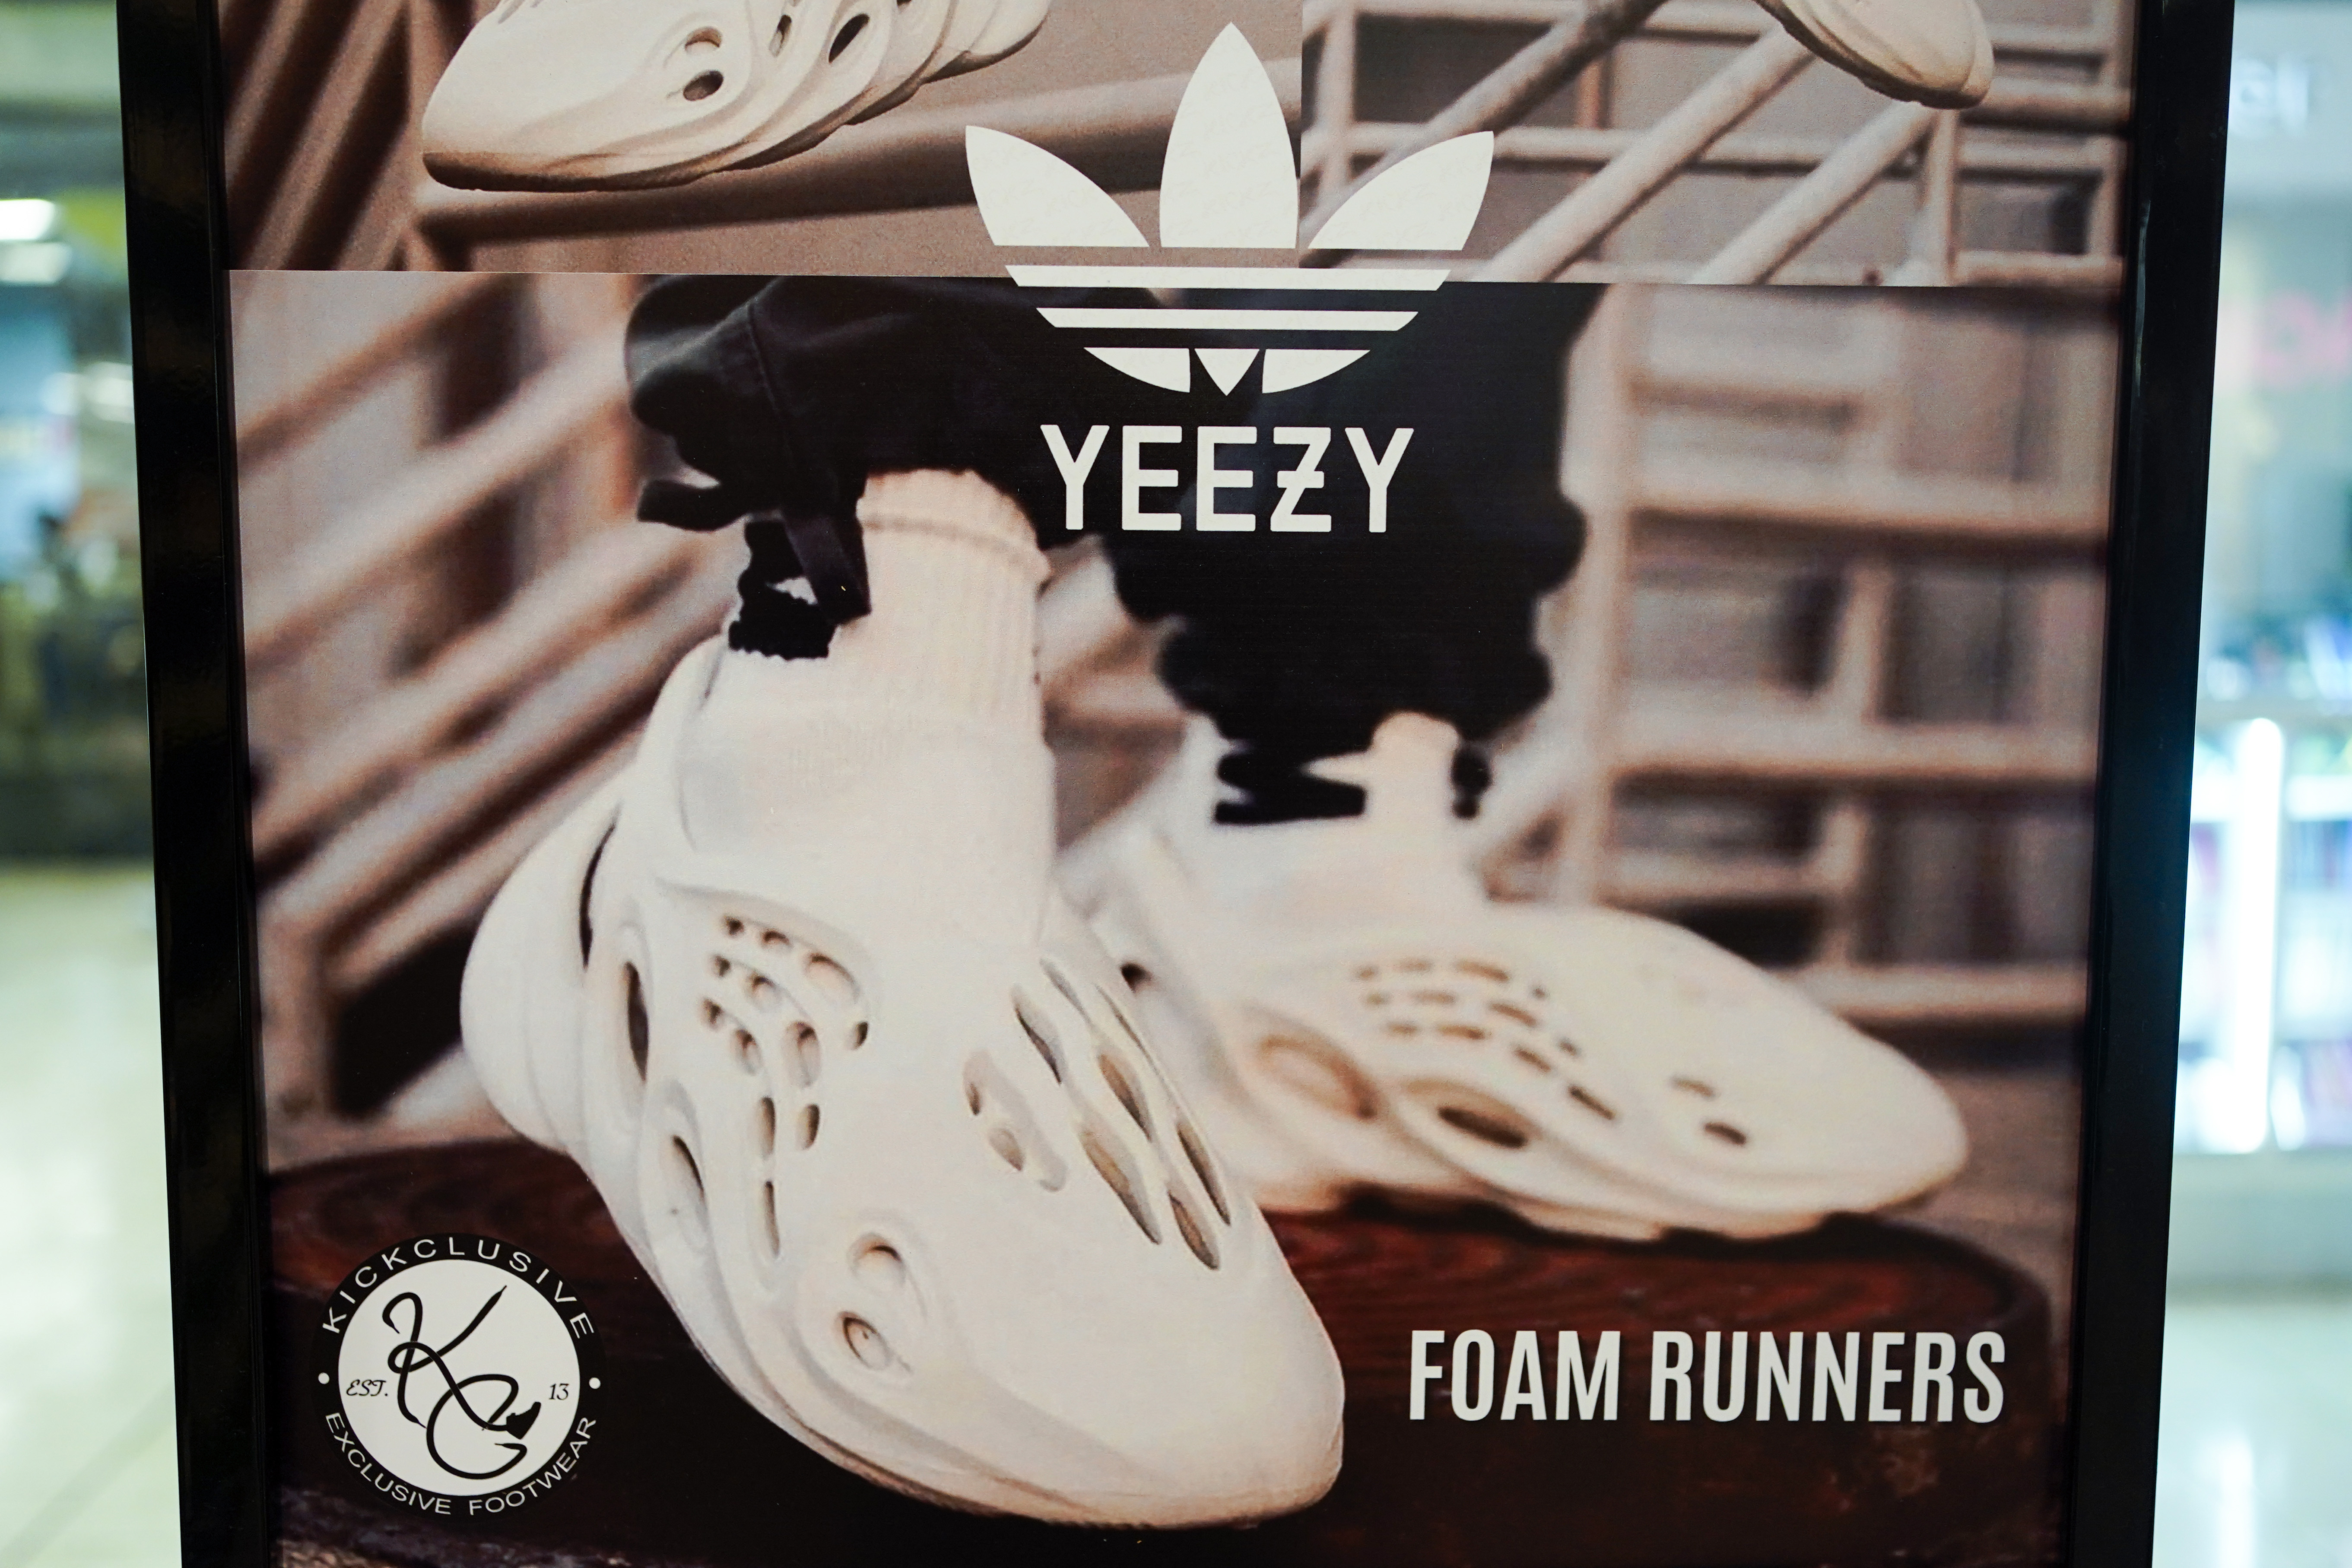 Adidas sells another batch of Yeezy sneakers